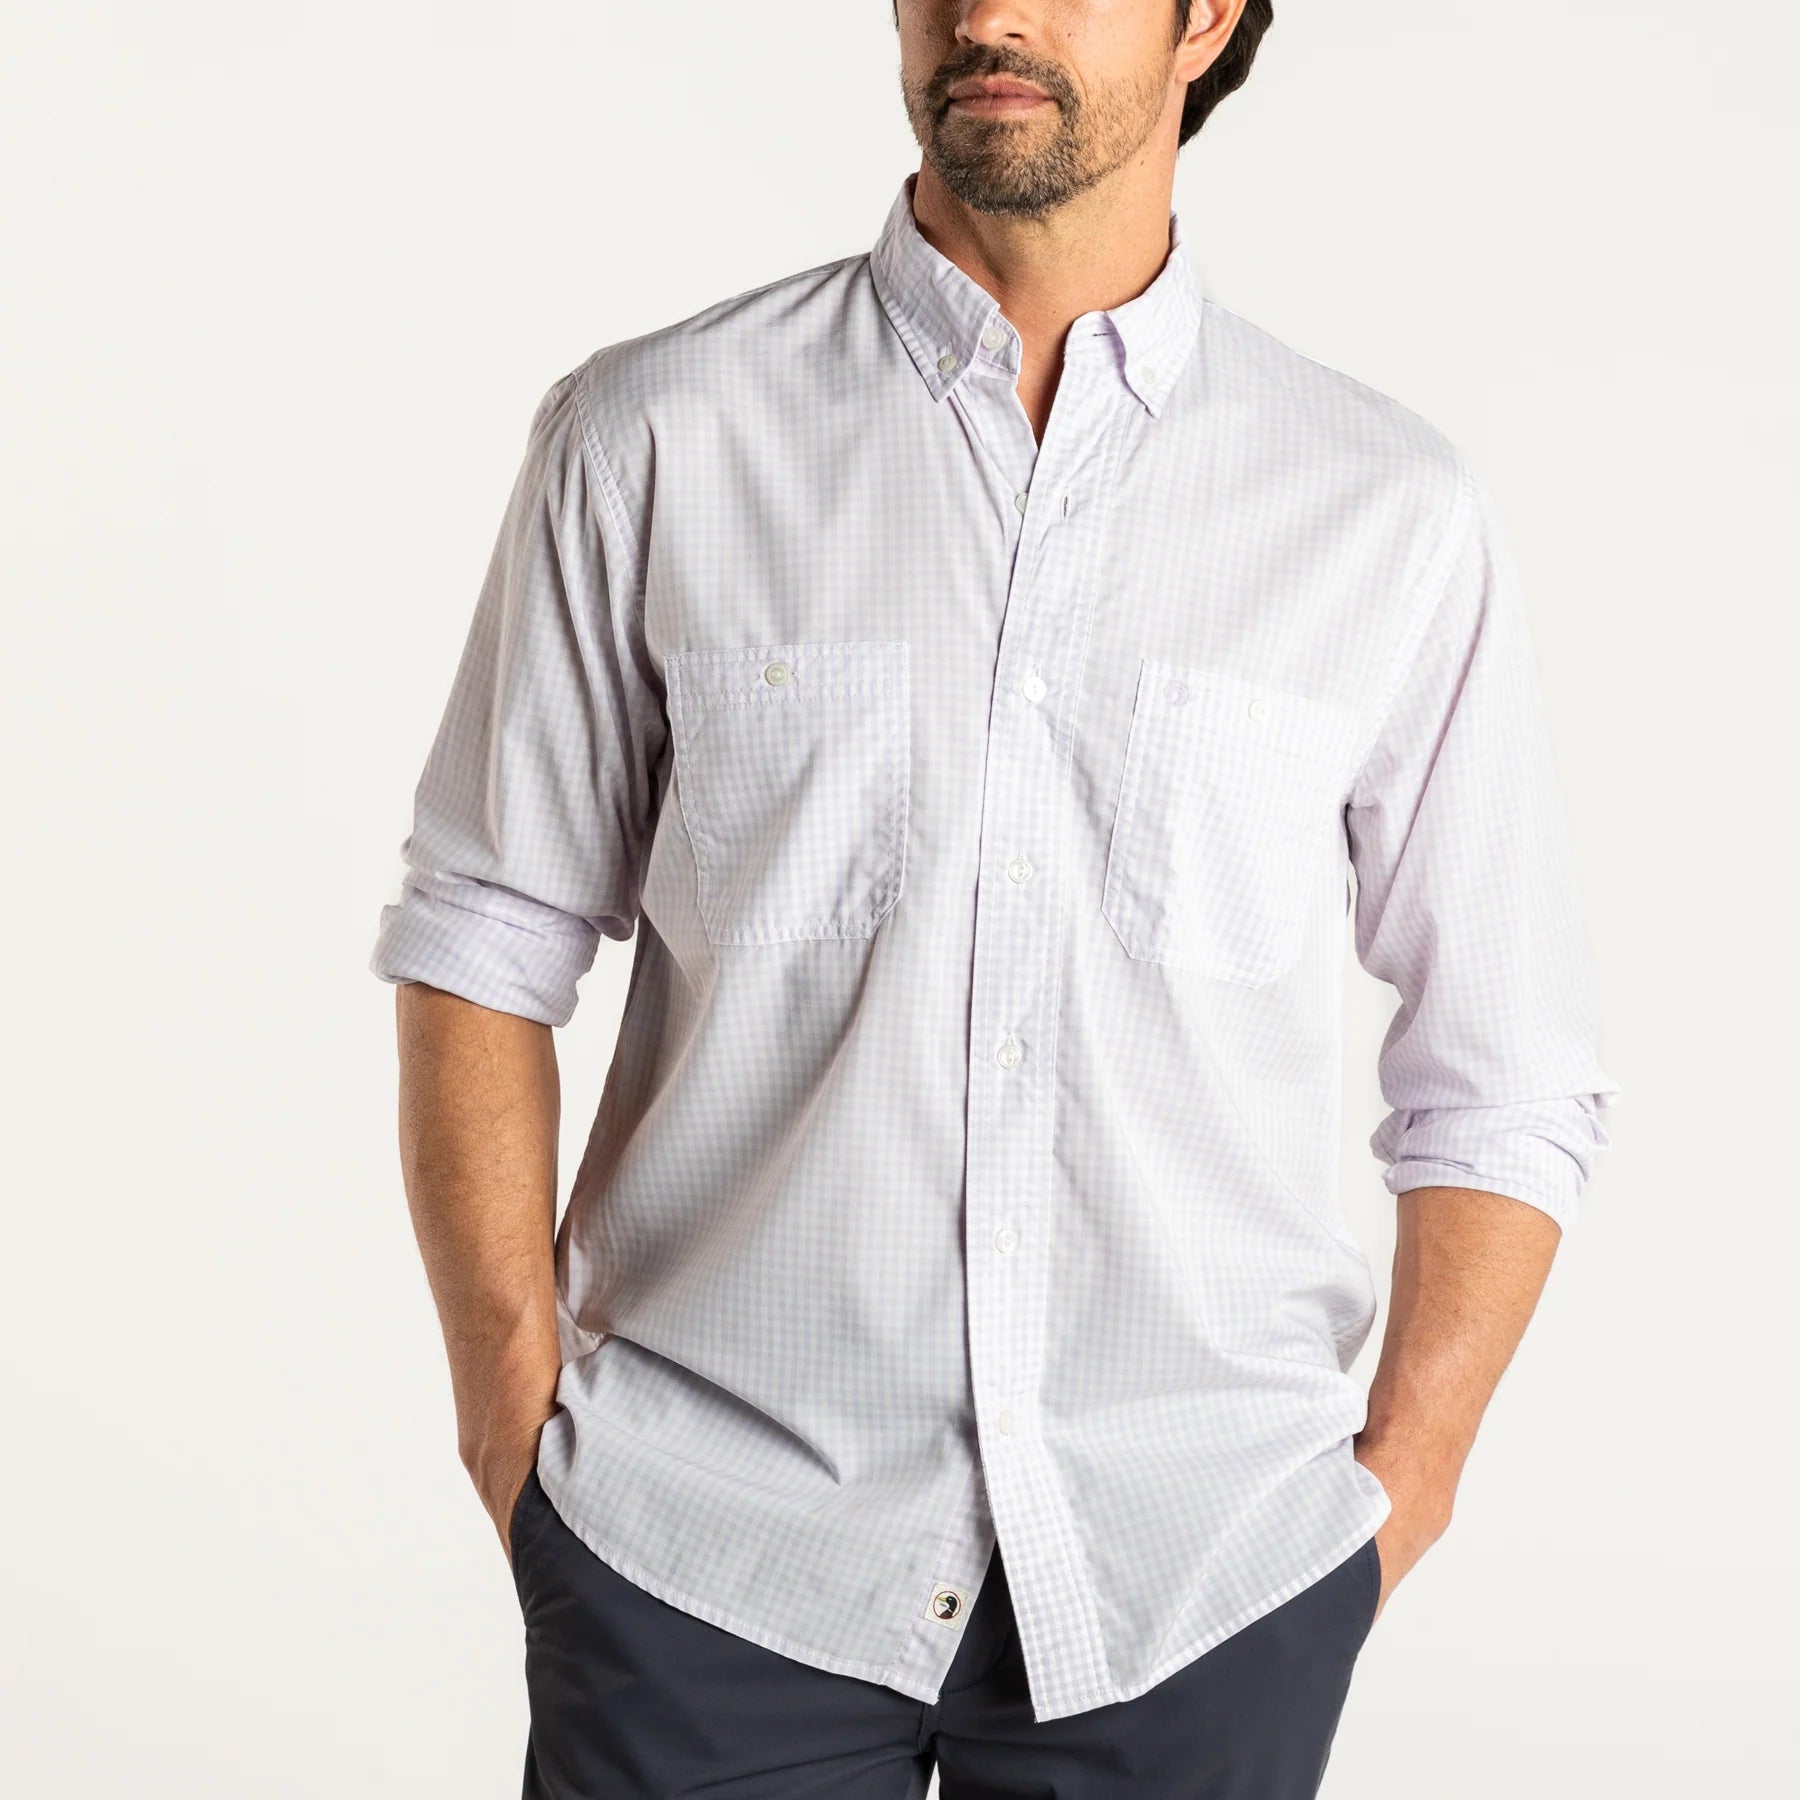 Duck Head Bryson Gingham Guide Shirt - Faded Periwinkle